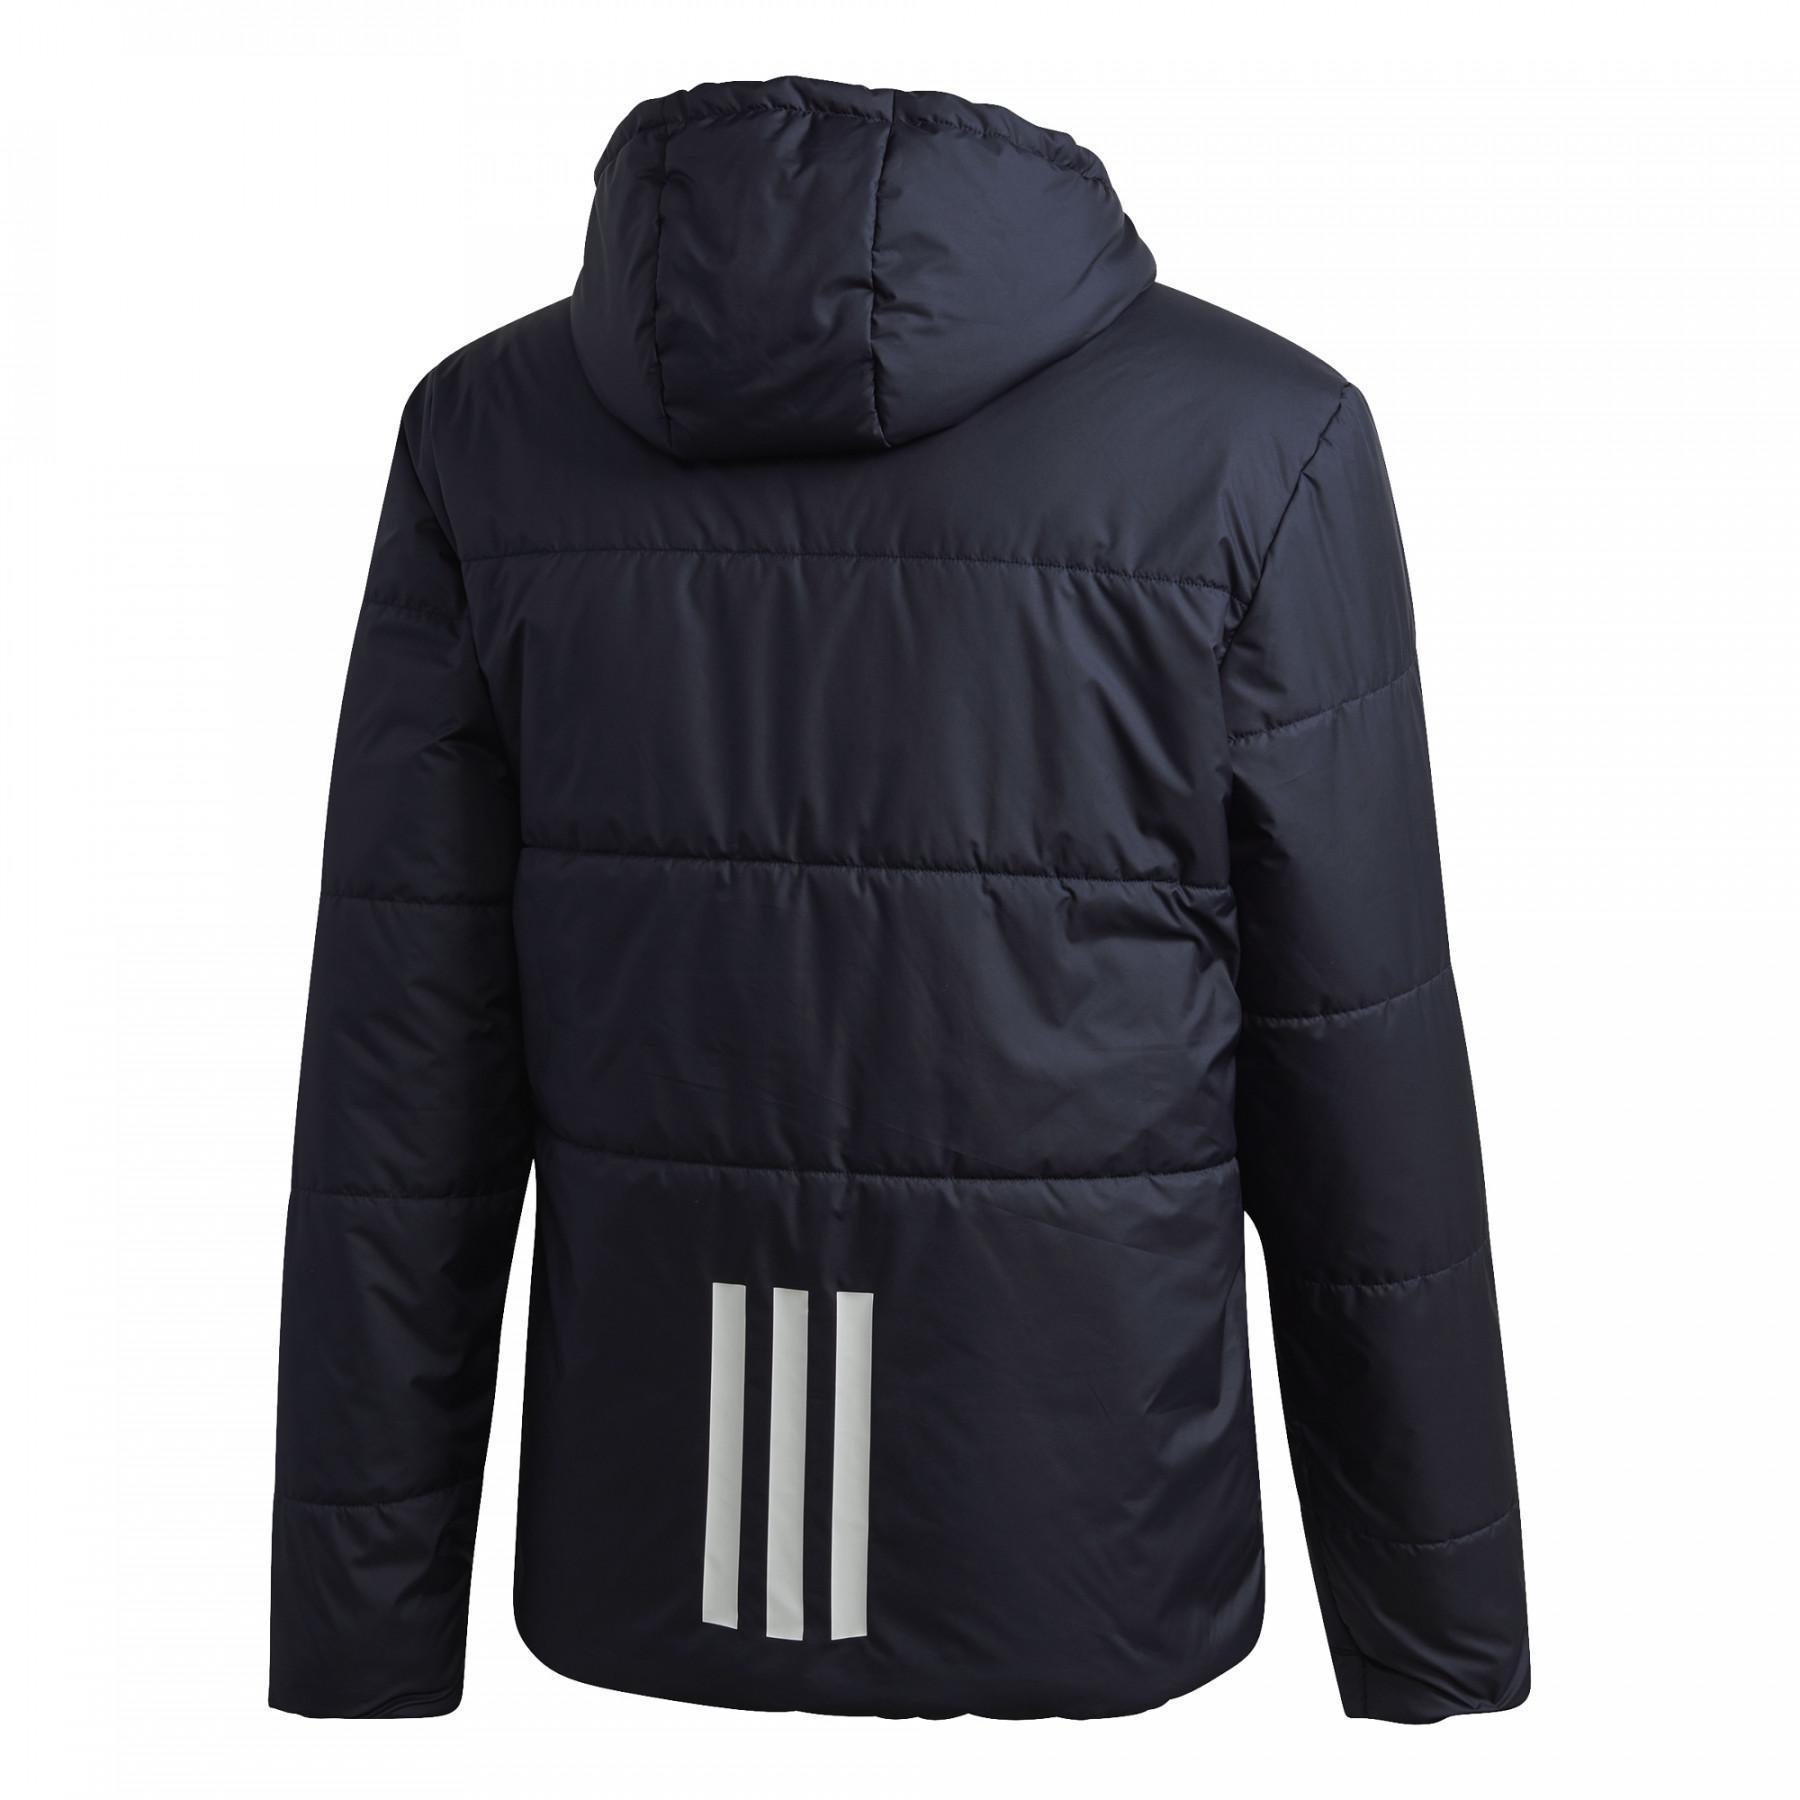 Jas adidas BSC Insulated Hooded